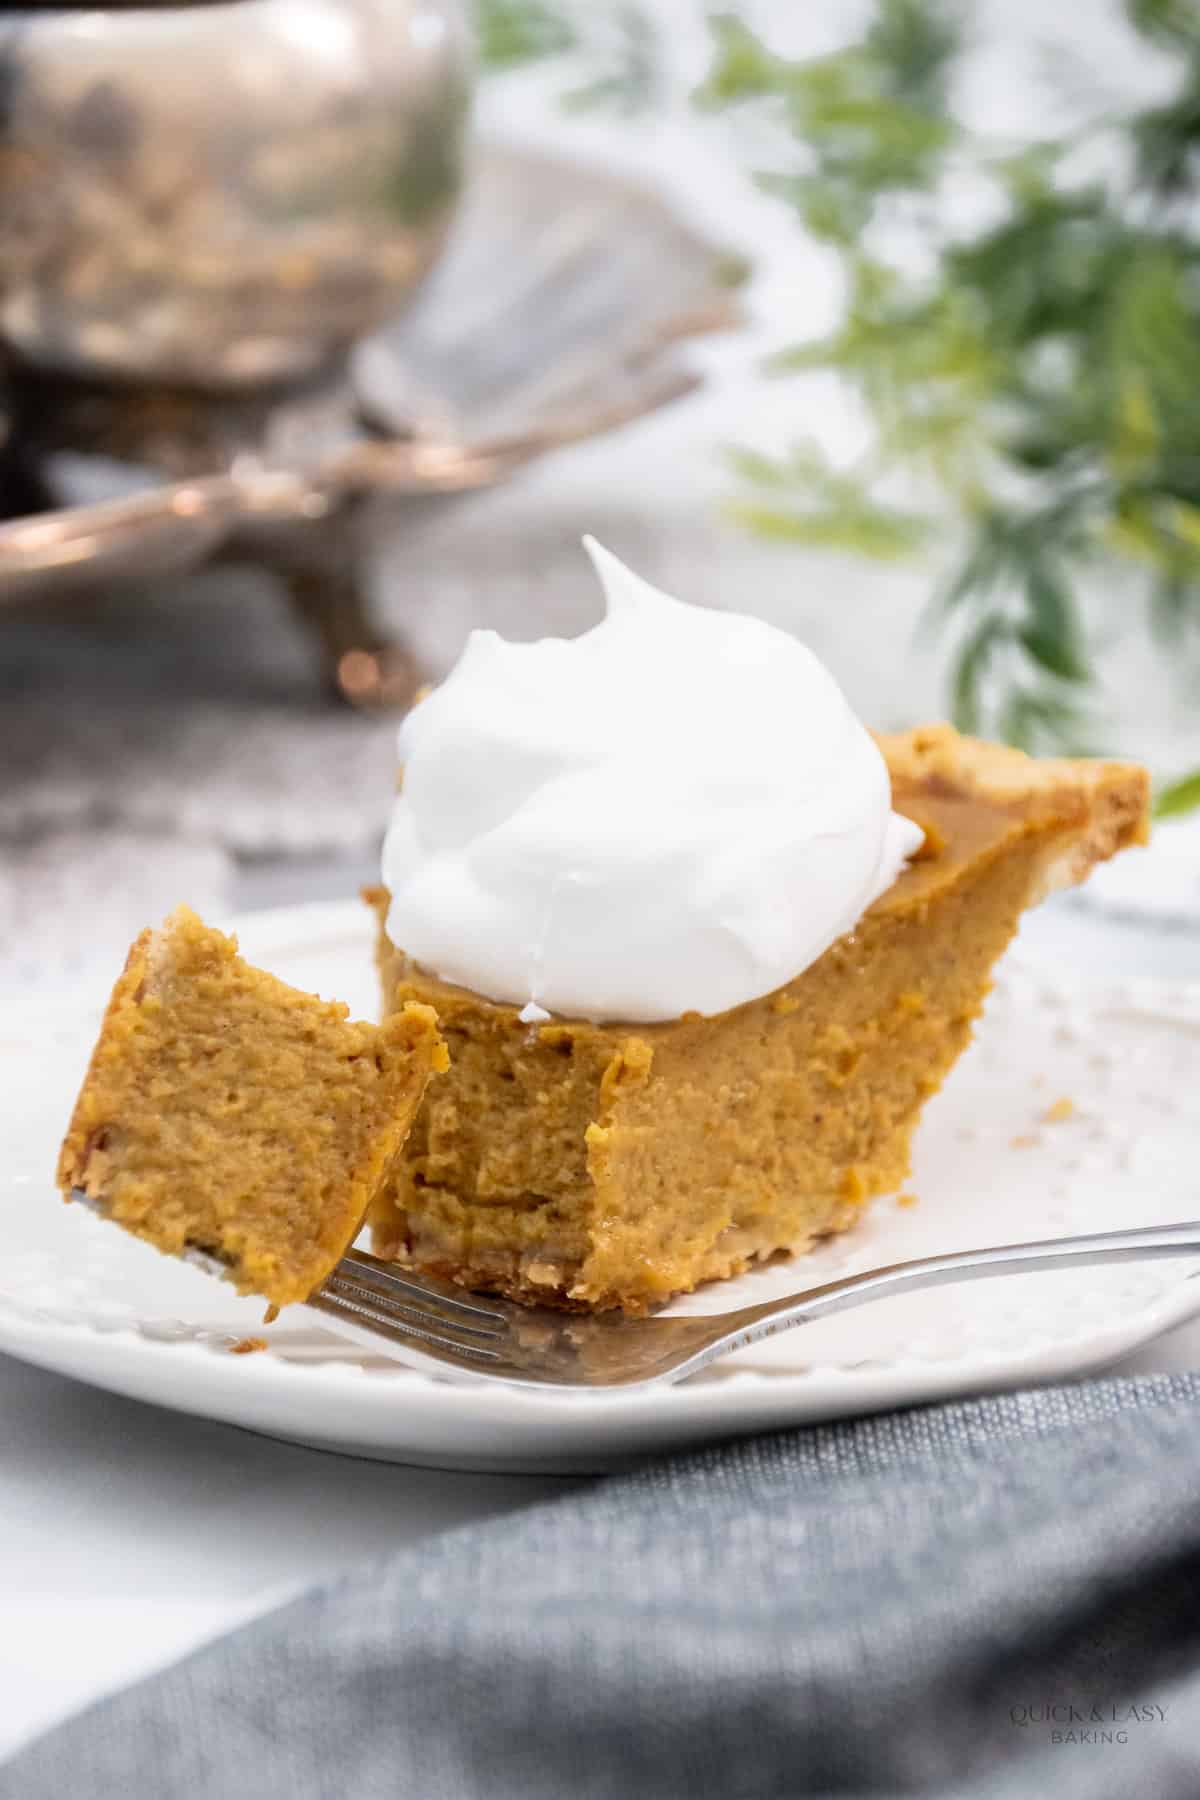 Baked pumpkin pie with fork on a plate.